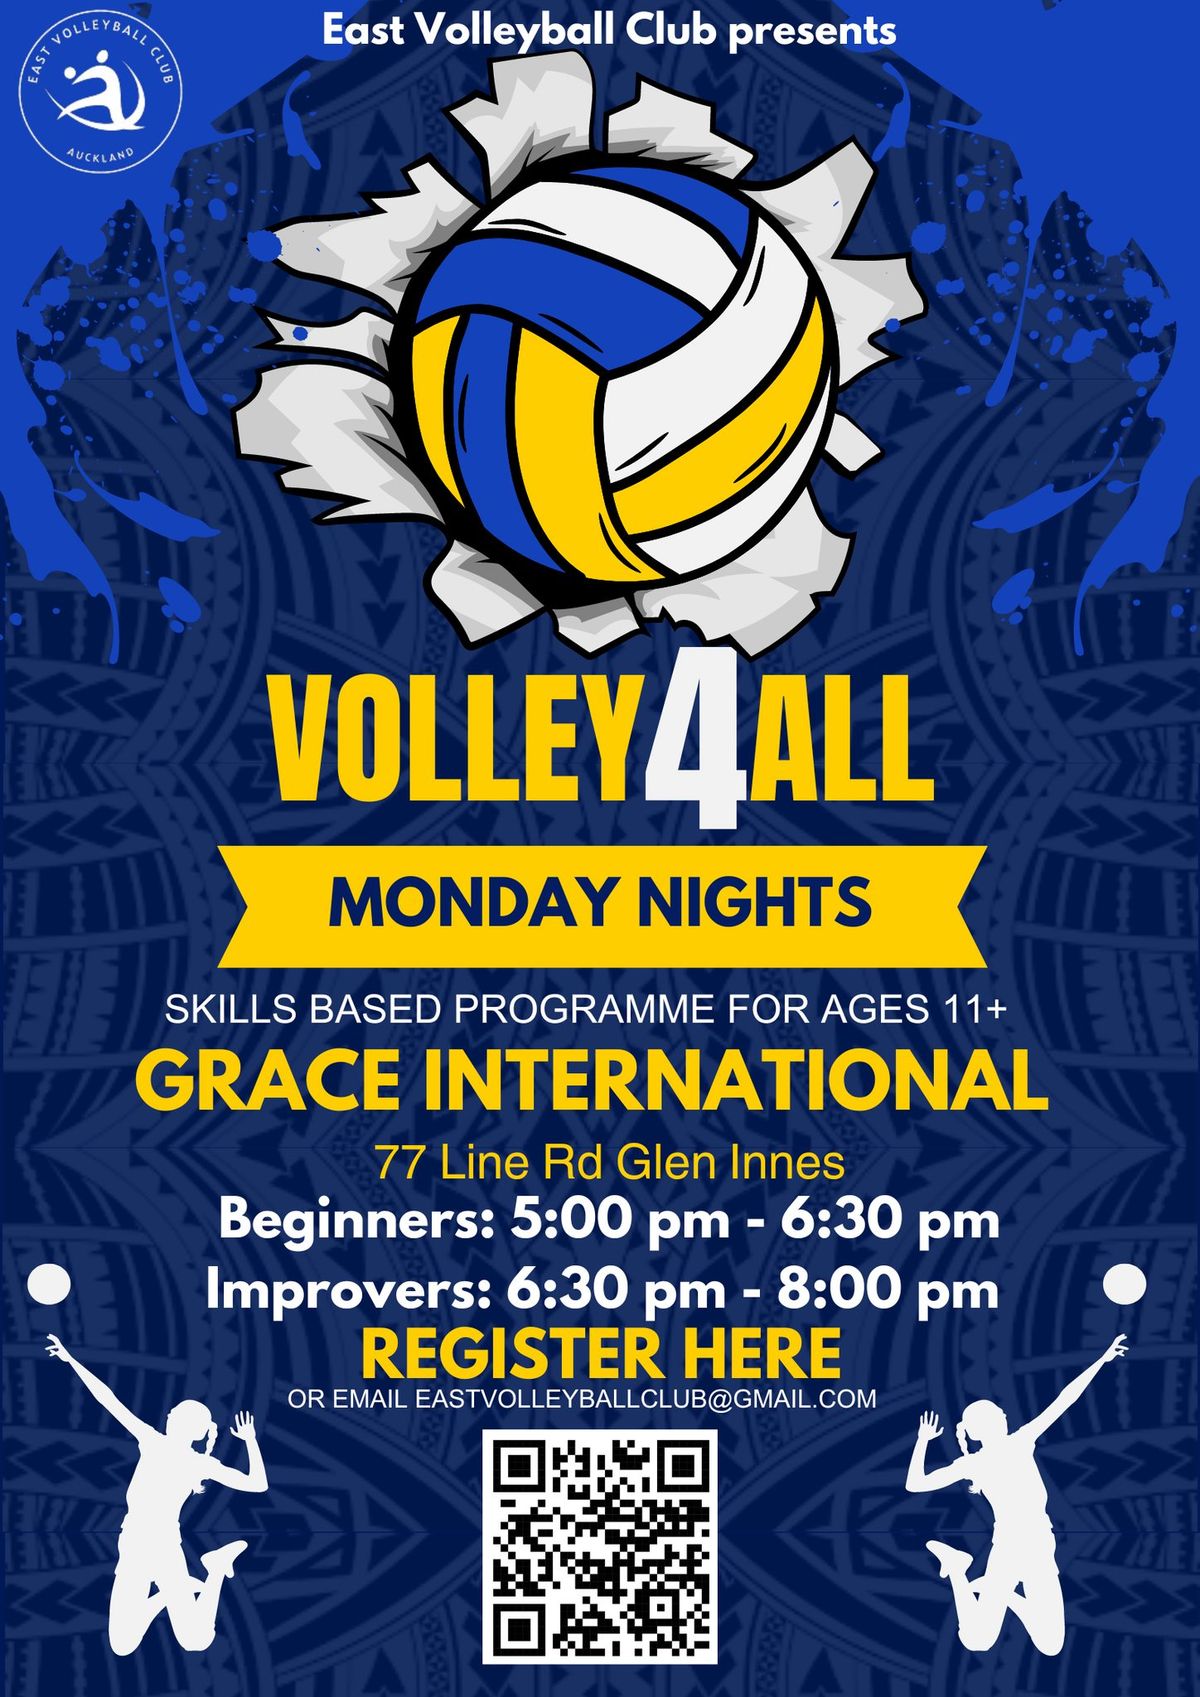 Volley4all - FREE Community Volleyball 